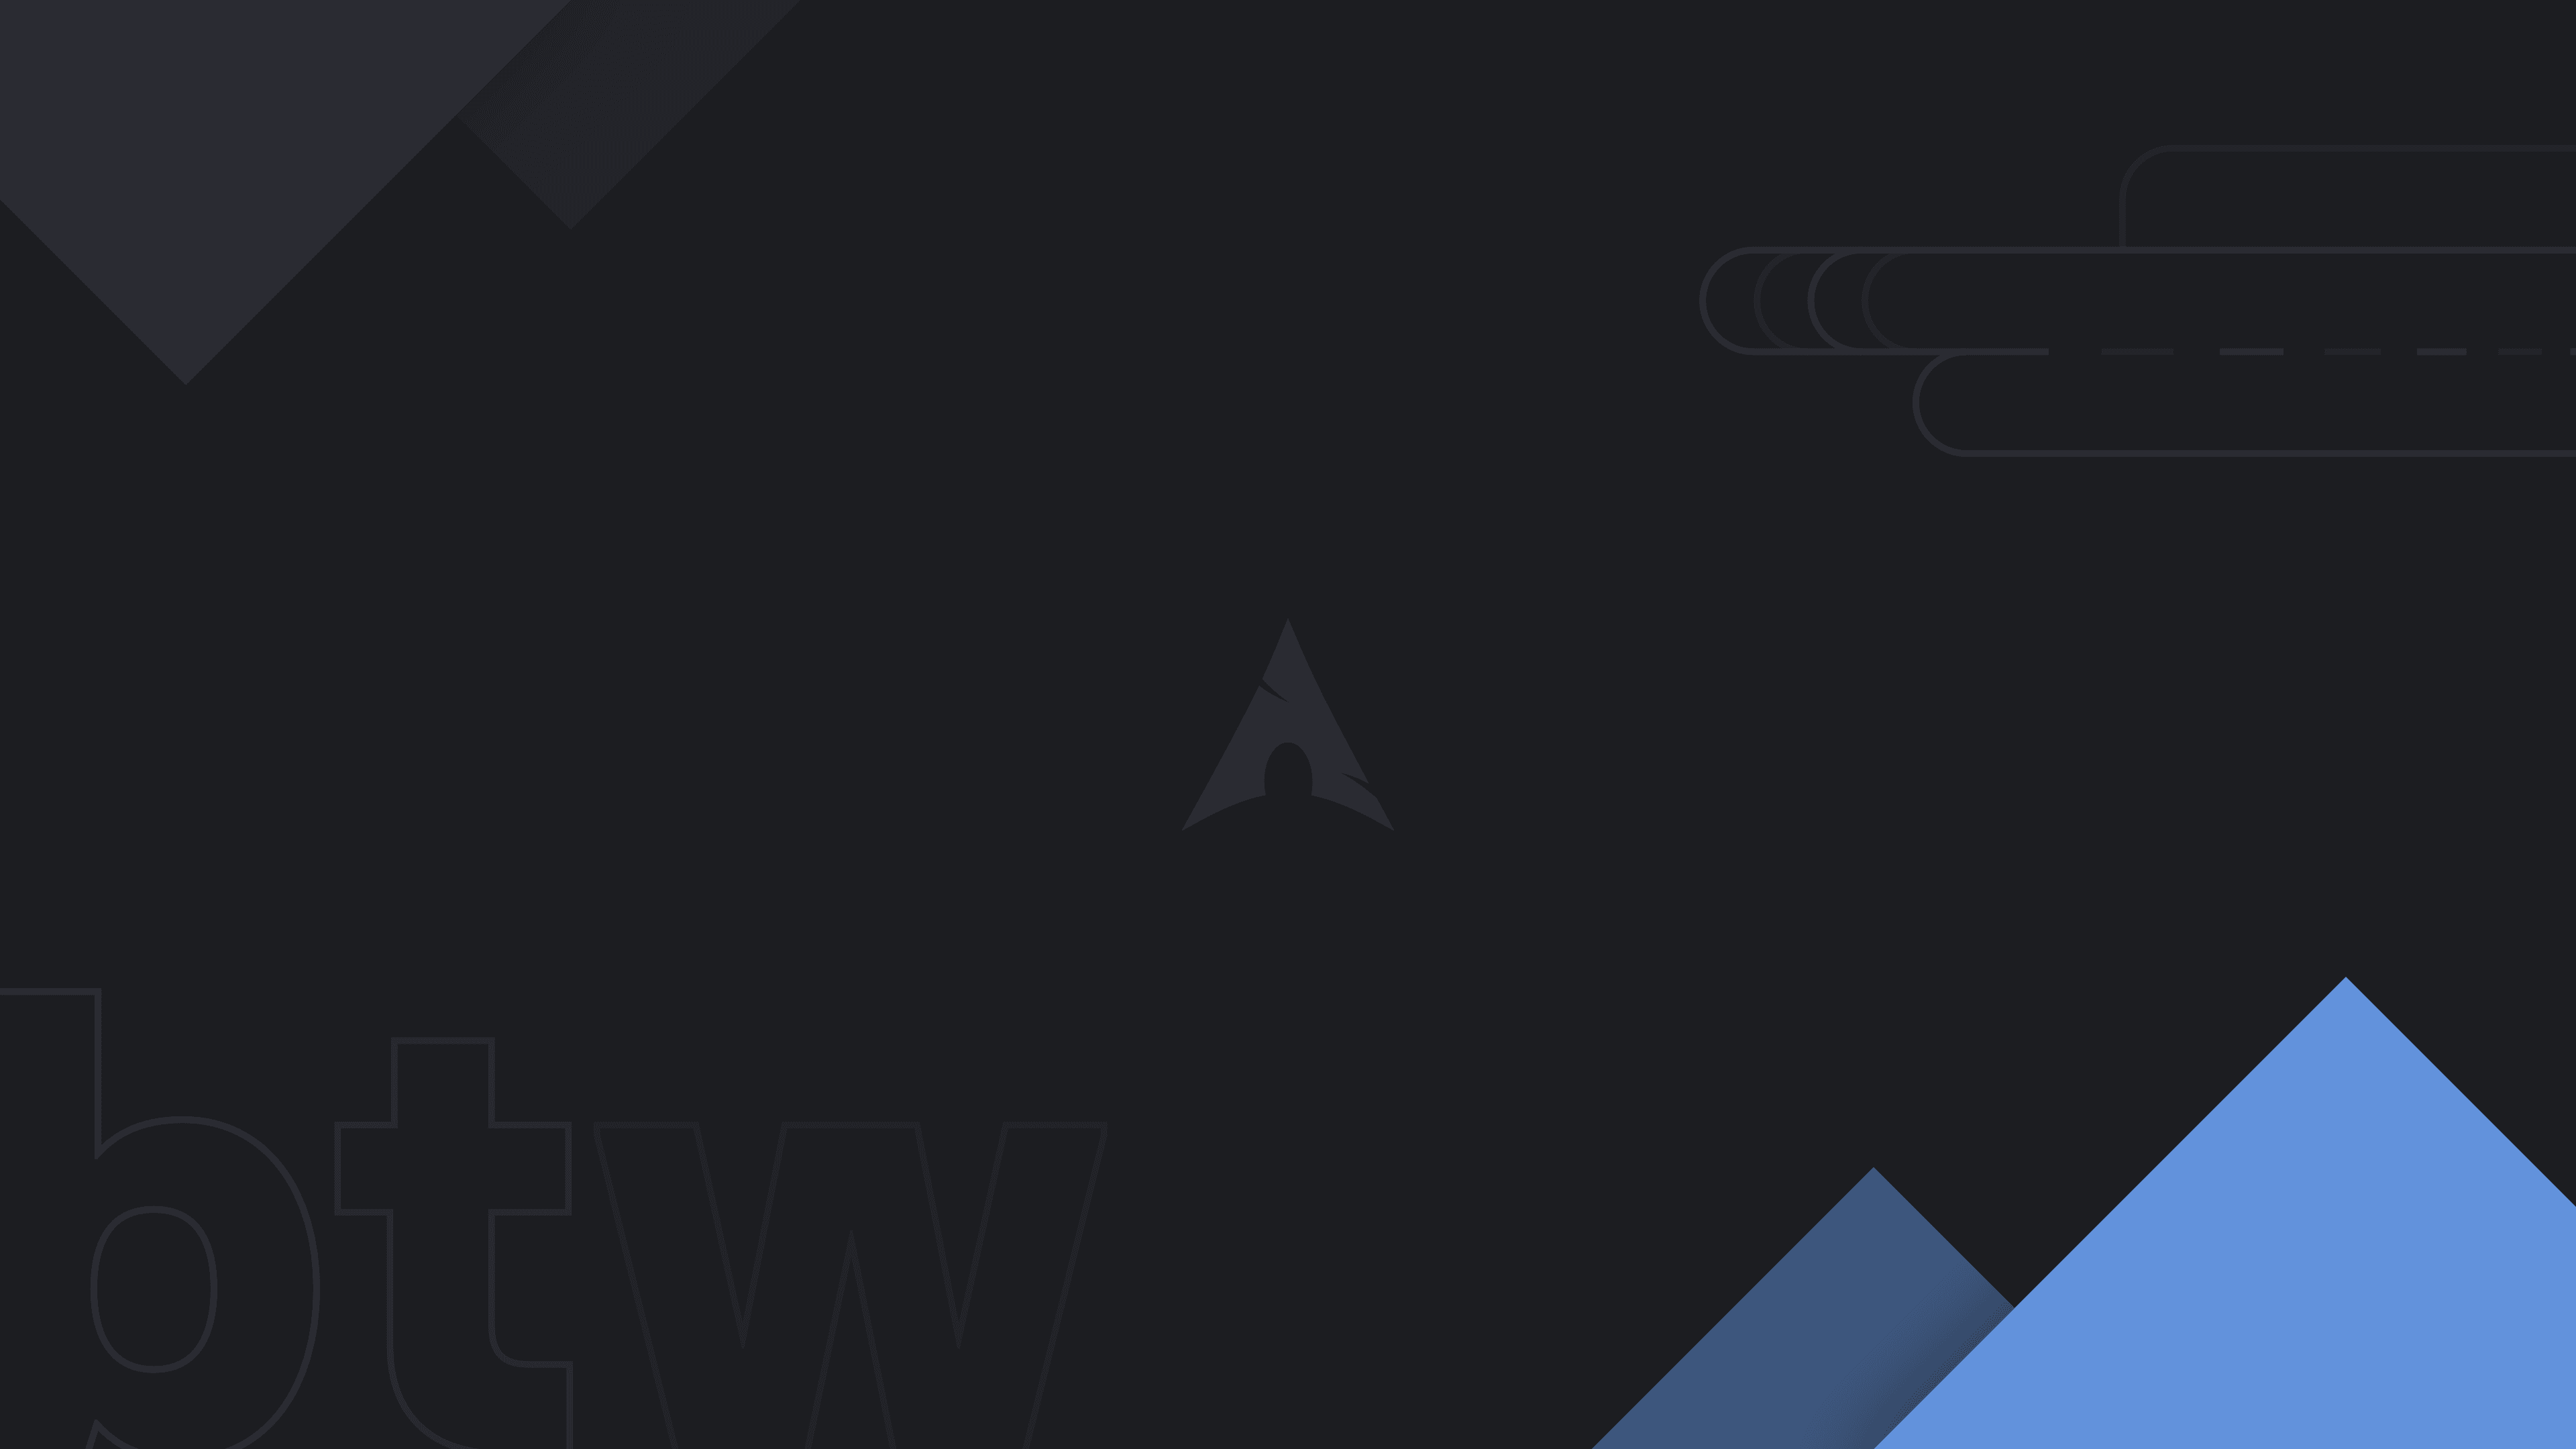 General 3840x2160 Linux Arch Linux mountains logo text black background minimalism